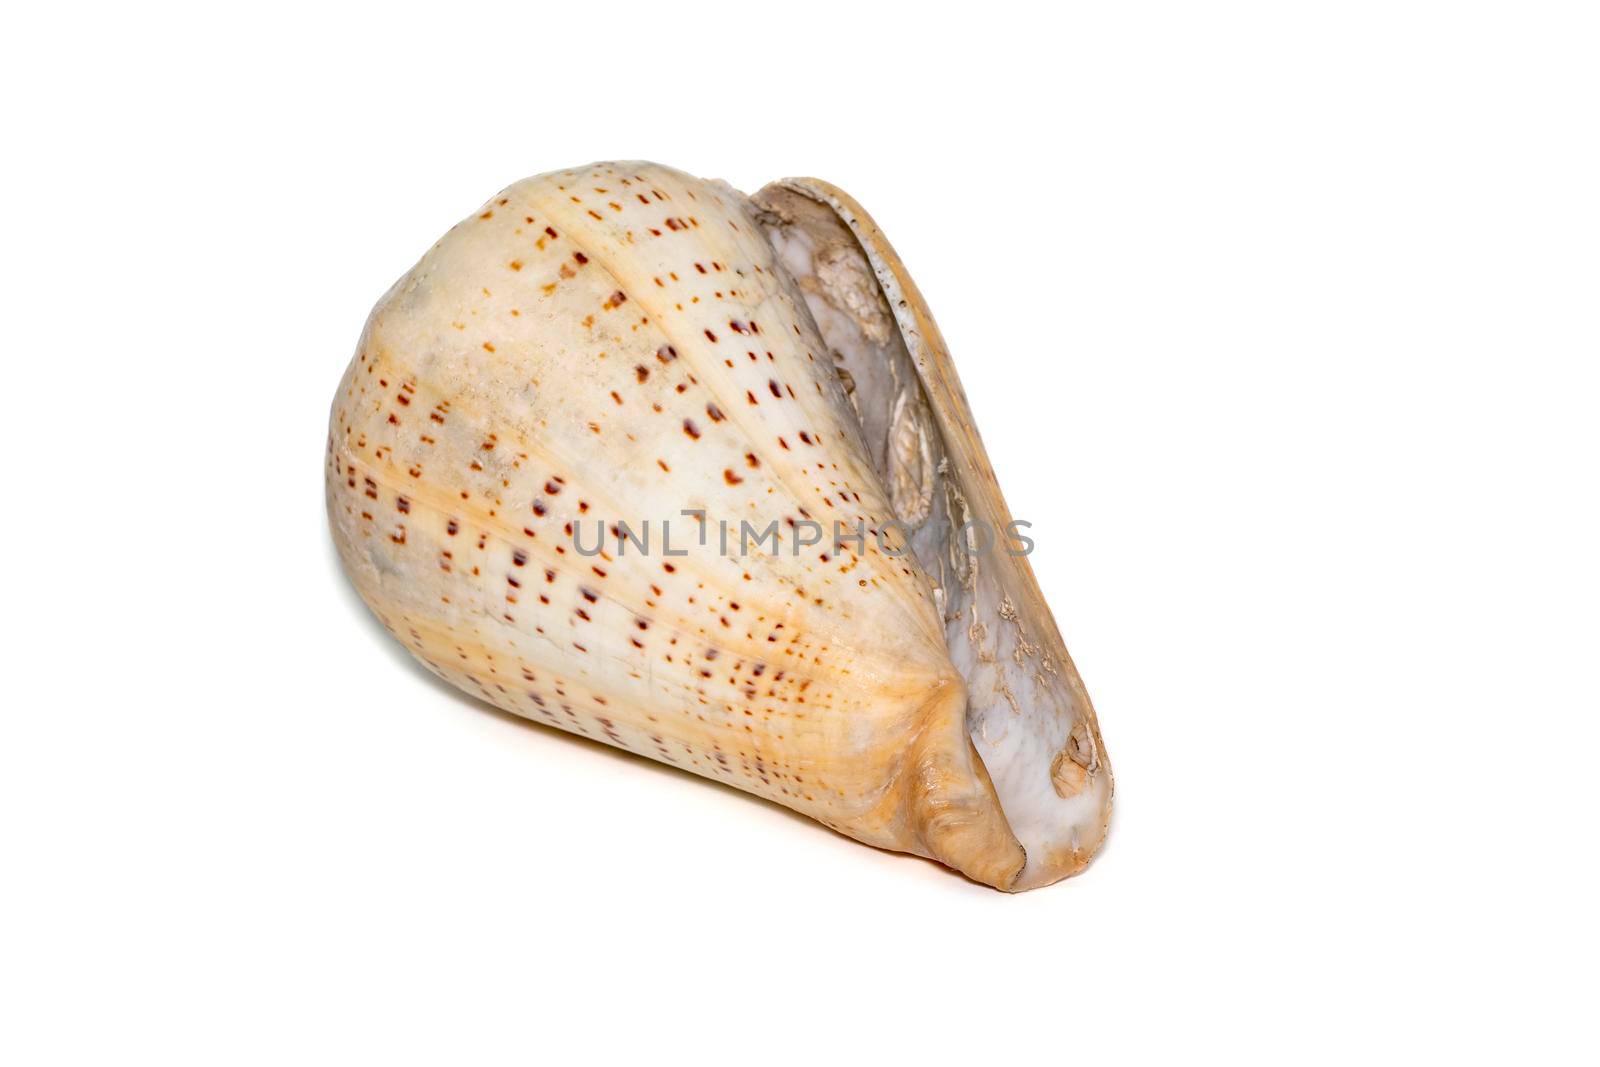 Conus betulinus, common name the betuline cone, is a species of sea snail, a marine gastropod mollusk in the family Conidae, the cone snails and their allies.